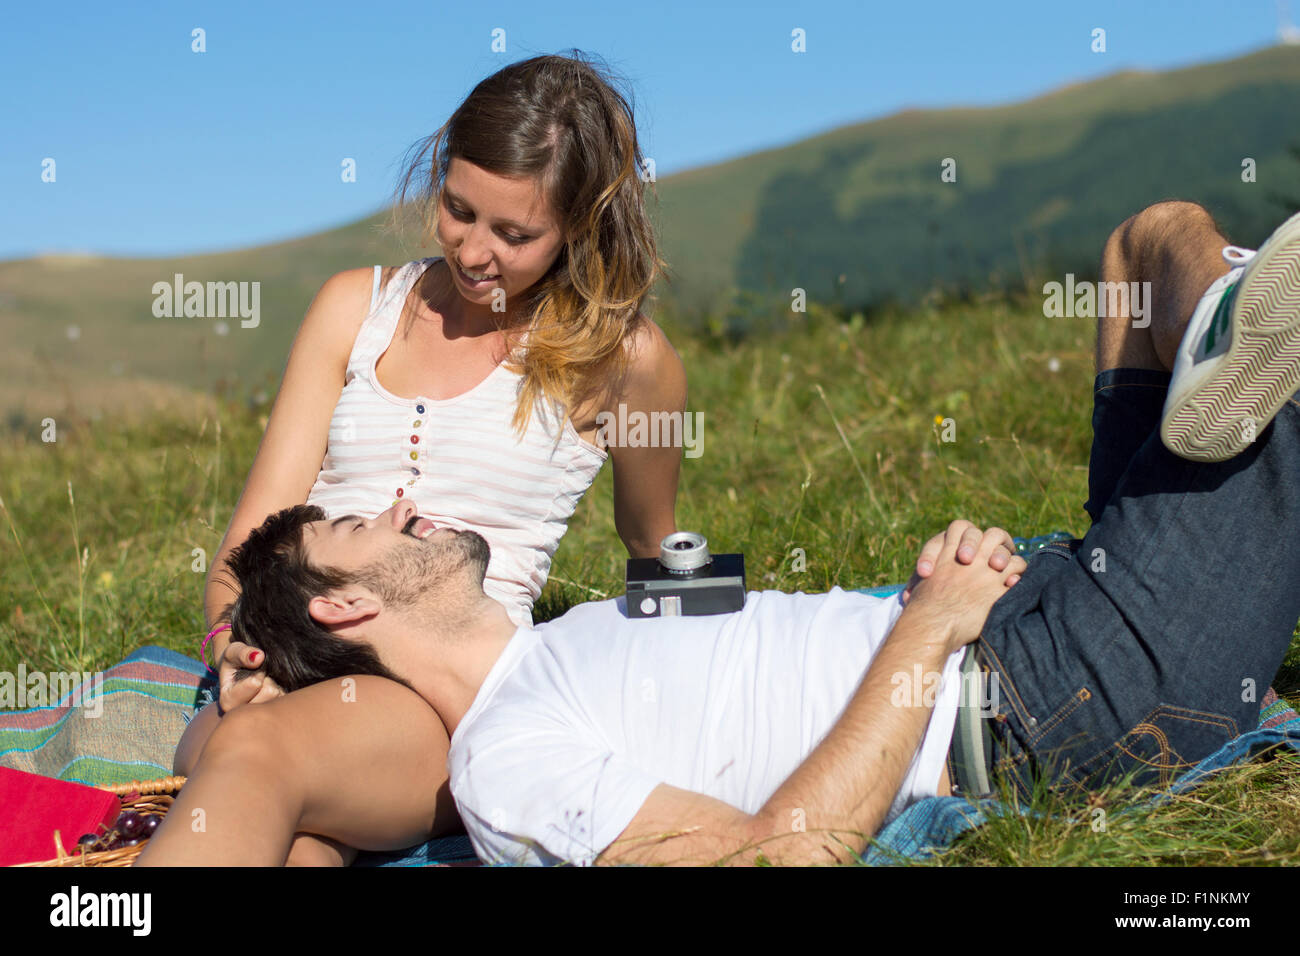 Loving couple out in the field expressing feelings. Outdoors date Stock Photo